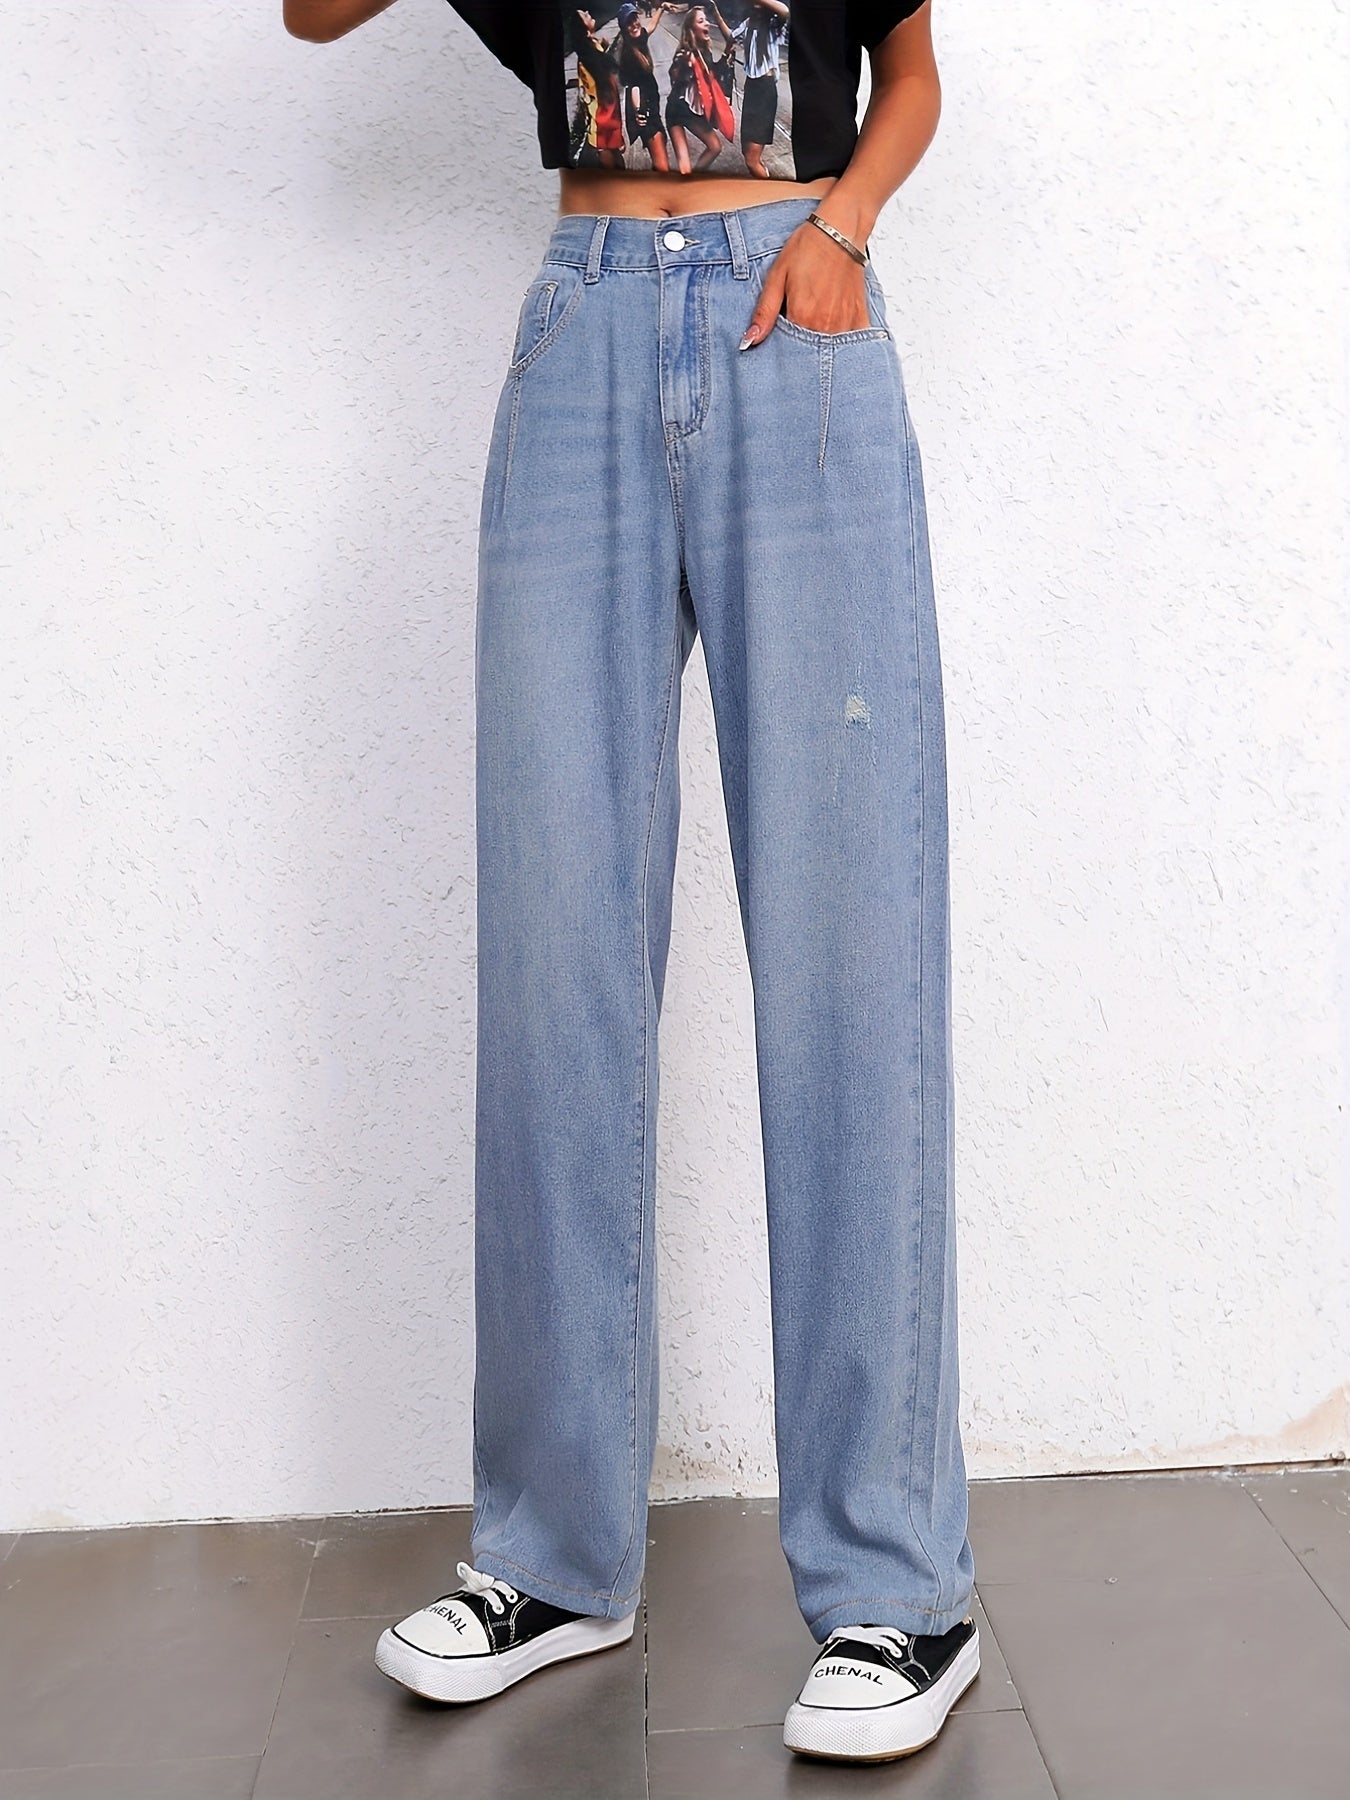 「binfenxie」Ripped Water Ripple Embossed Denim Pants, Slash Pocket Causal Style Straight Leg Jeans, Essential Pants For Every Day, Women's Denim Jeans & Clothing